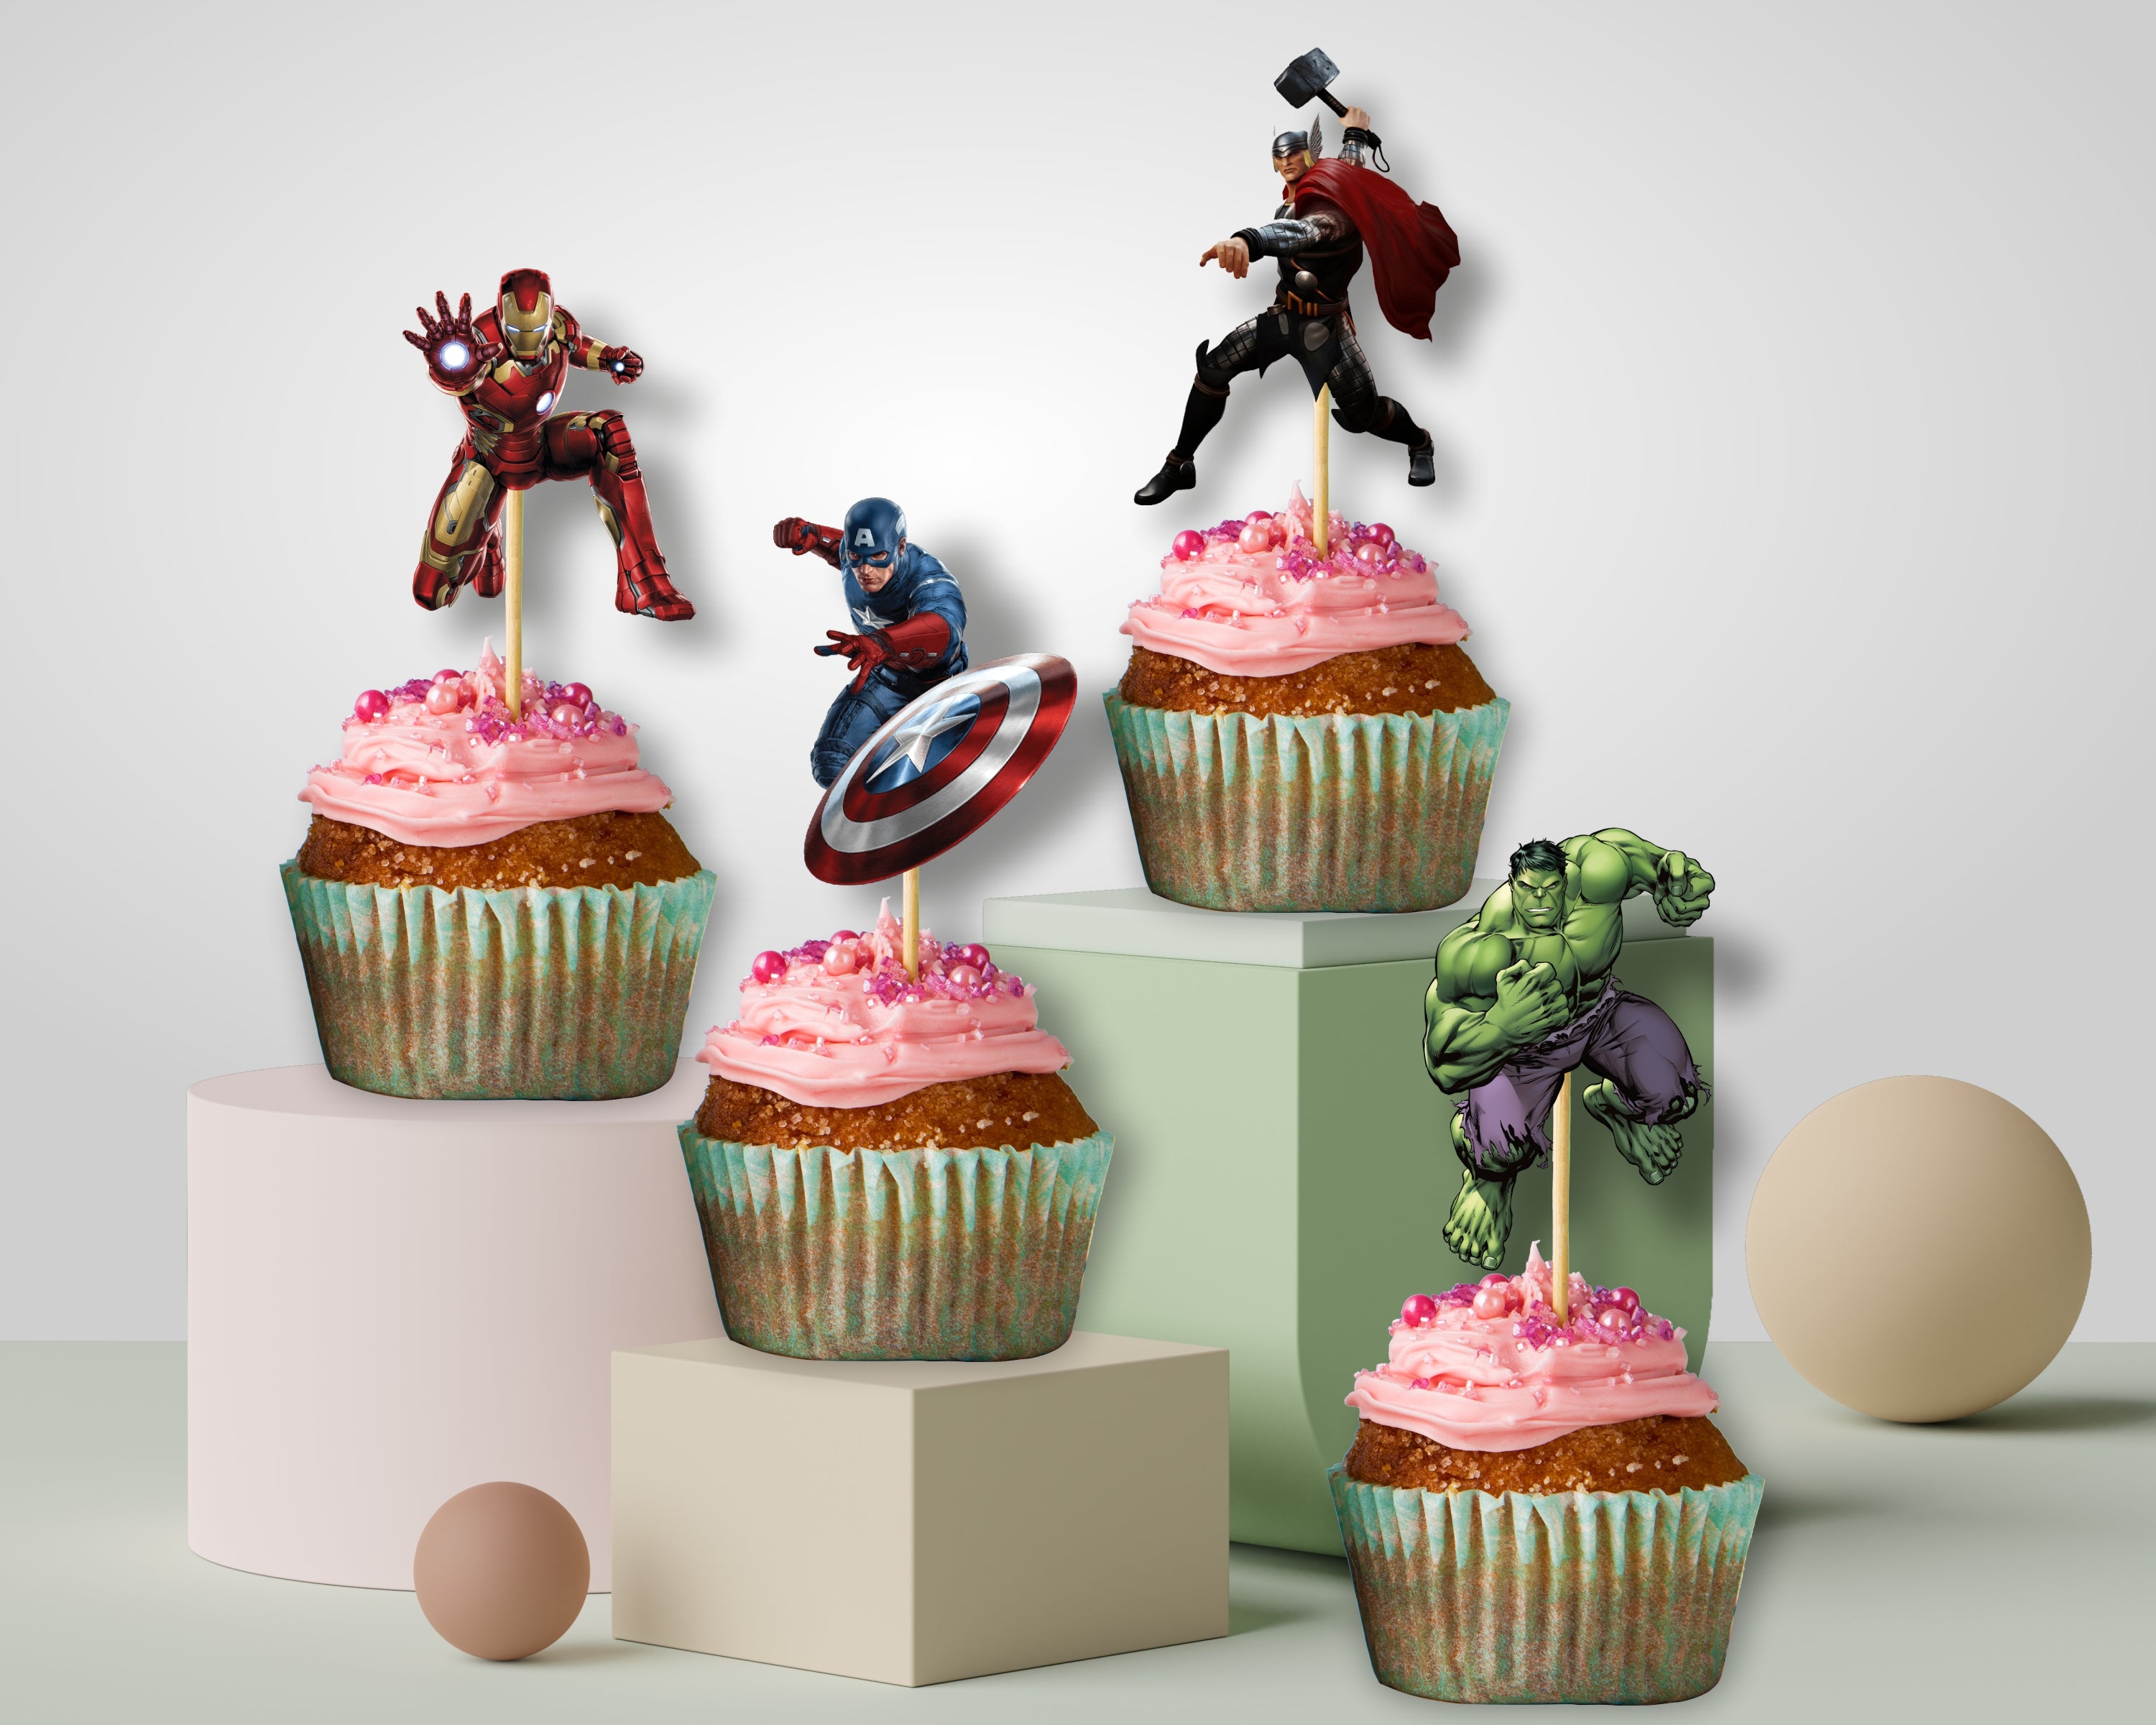 THE AVENGERS Edible cake topper image Party decoration | eBay